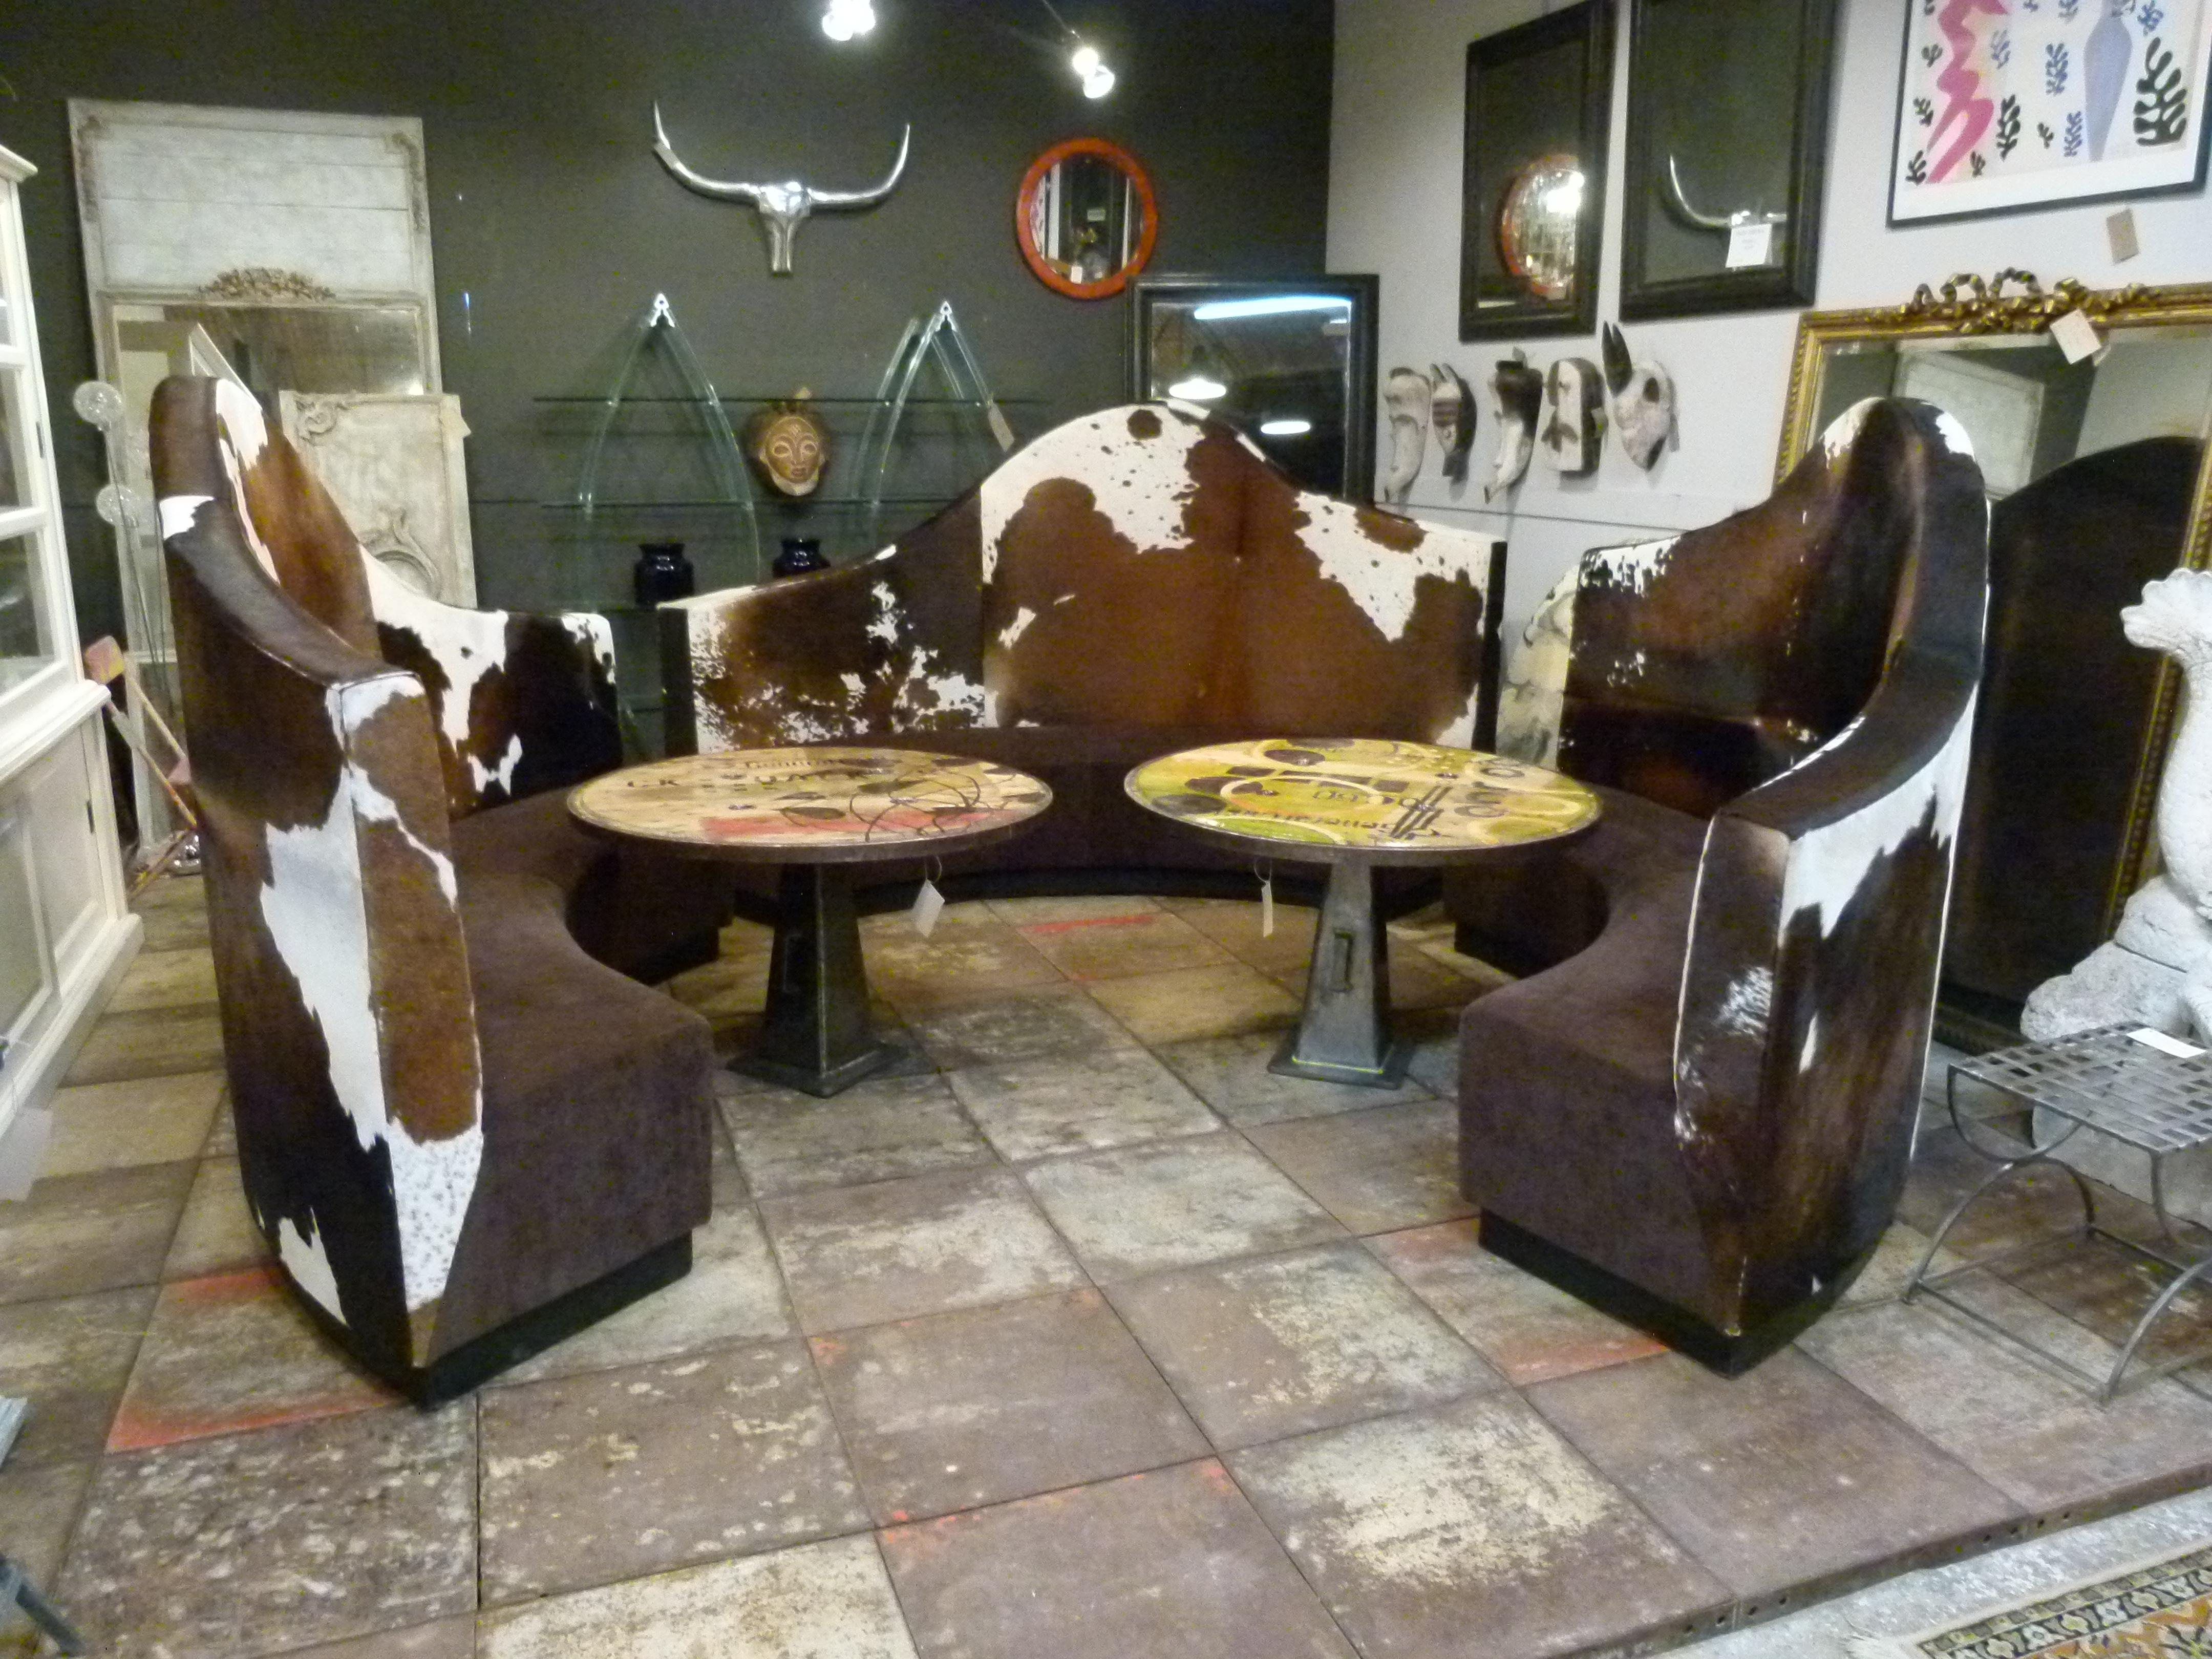 Country style set of cow leather sofas from France. The structure is made of hardwood. The semicircular shape allows placing them in a circular composition creating a nice corner.

Each sofa measures: 260 x 60 x 150 cm (102 x 23.6 x 59 in).
We have